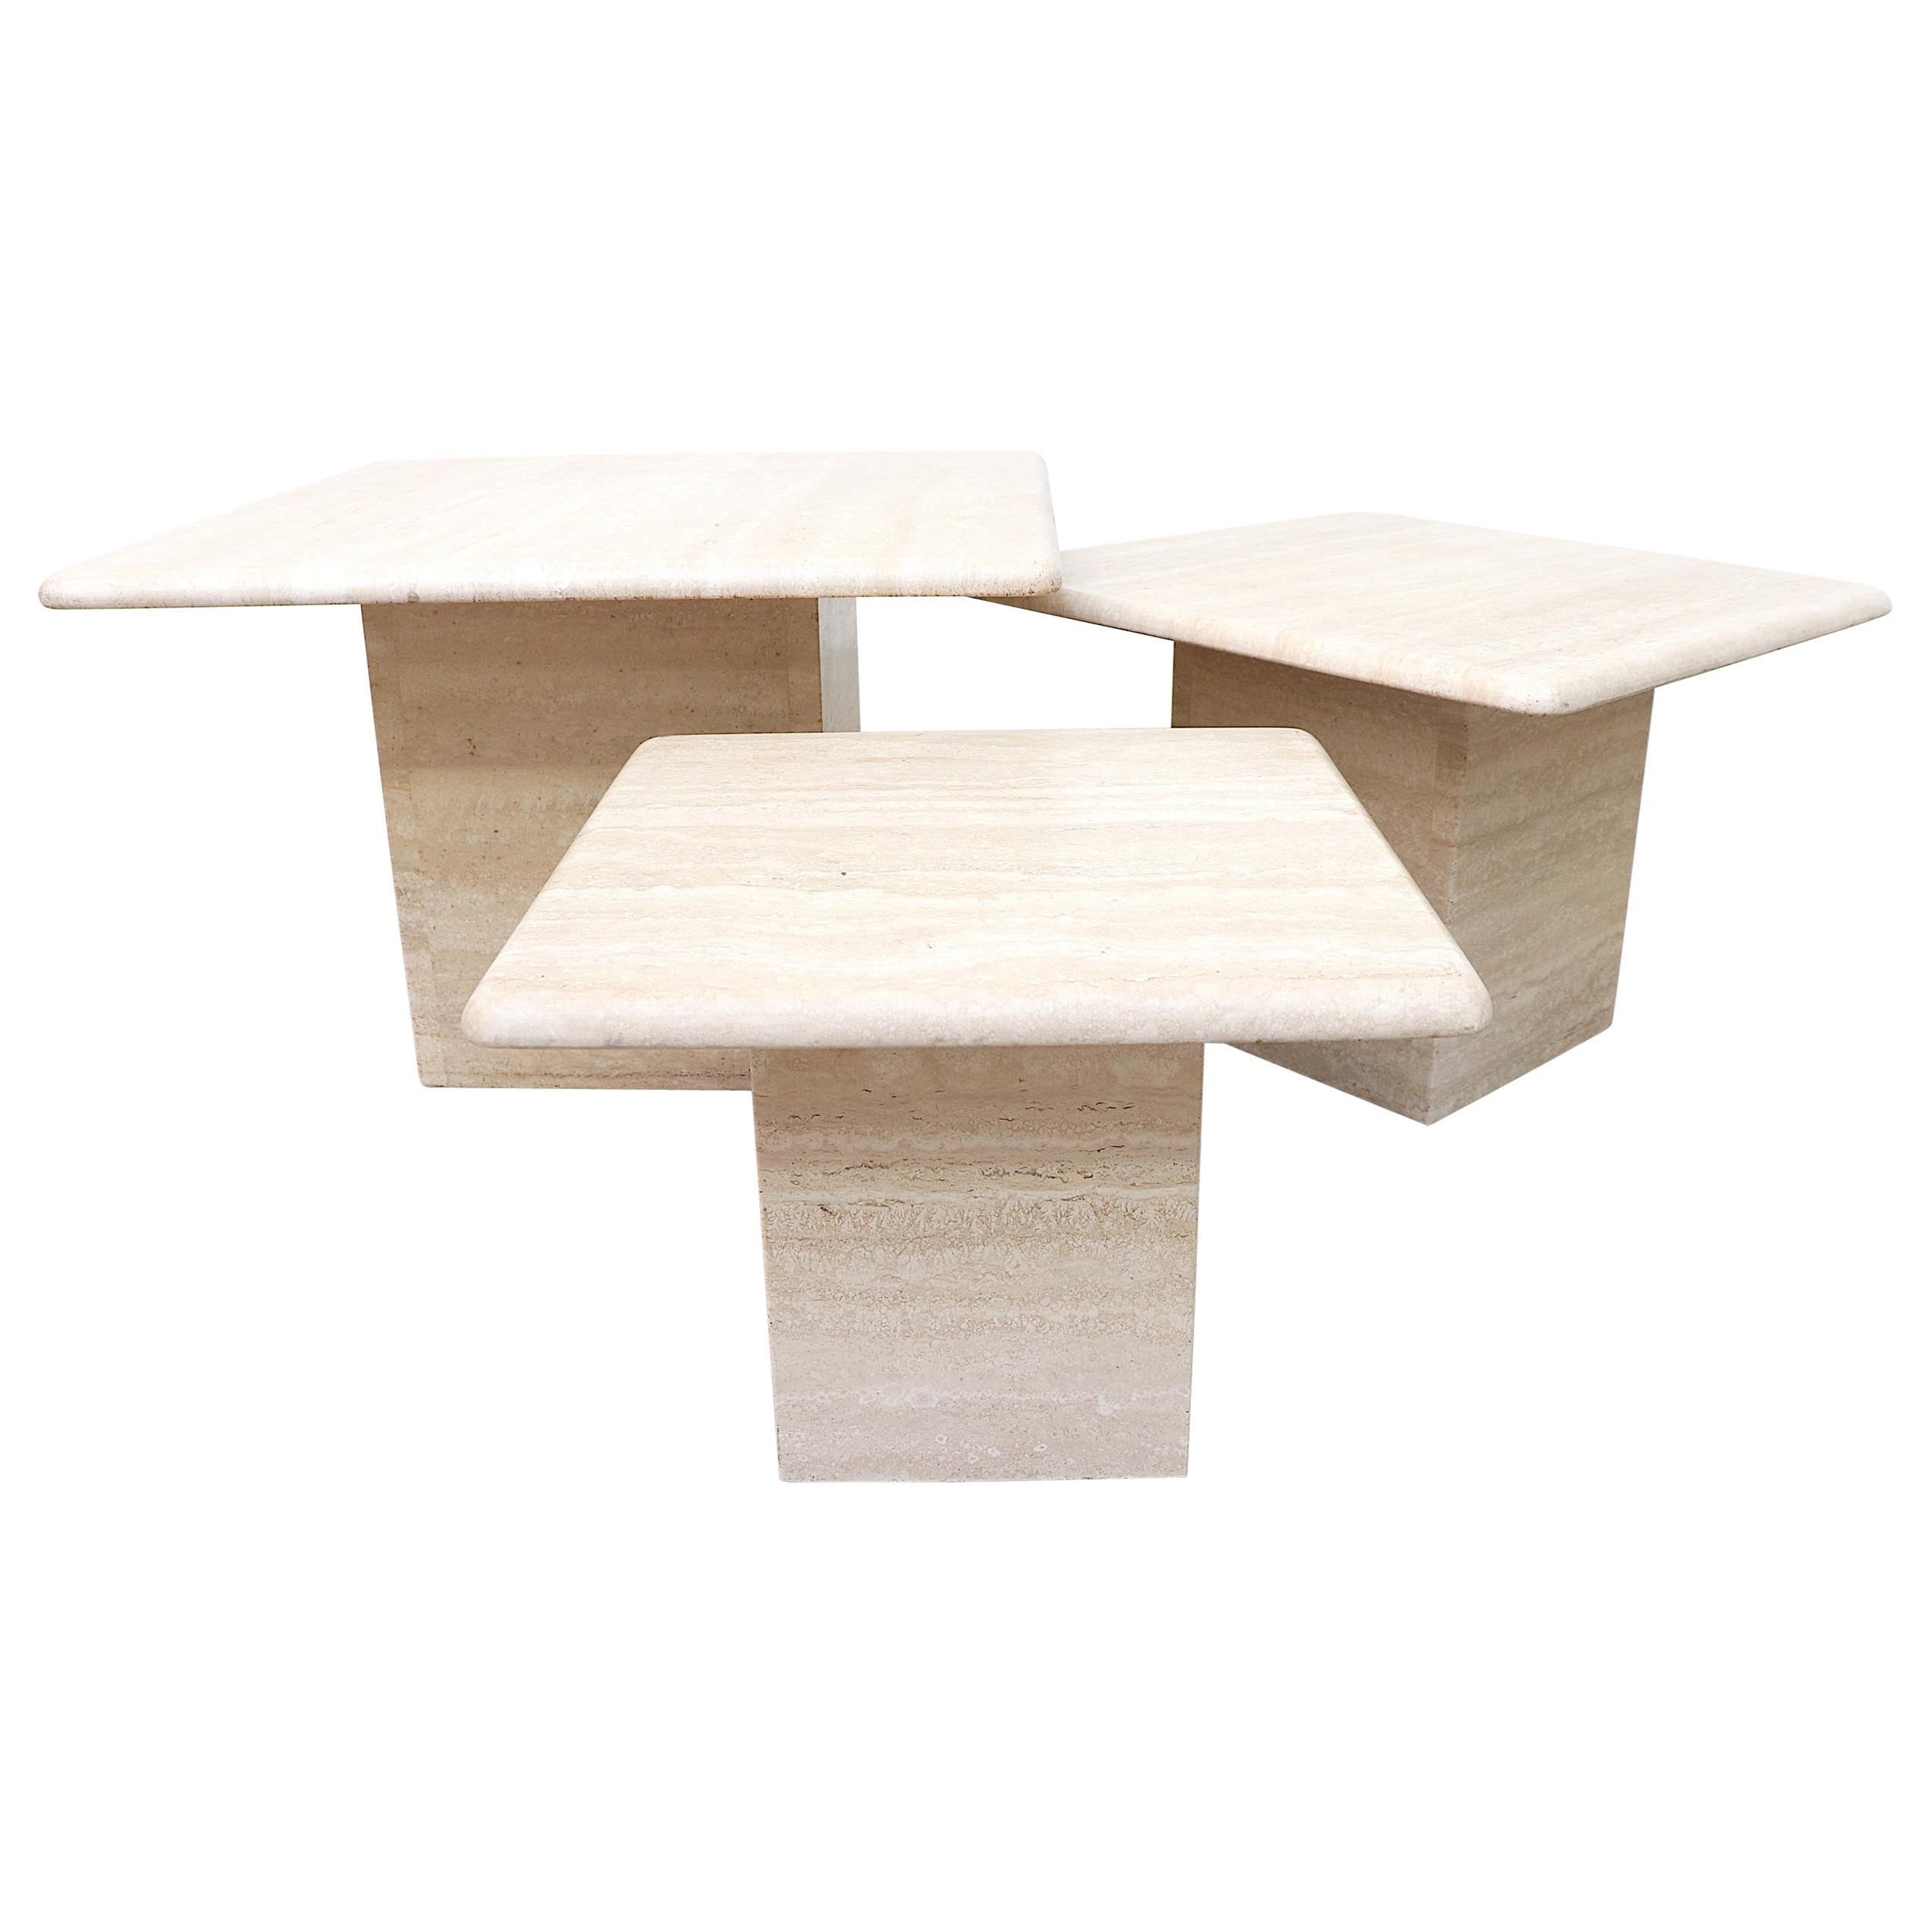 3 Travertine Coffee or Side Tables